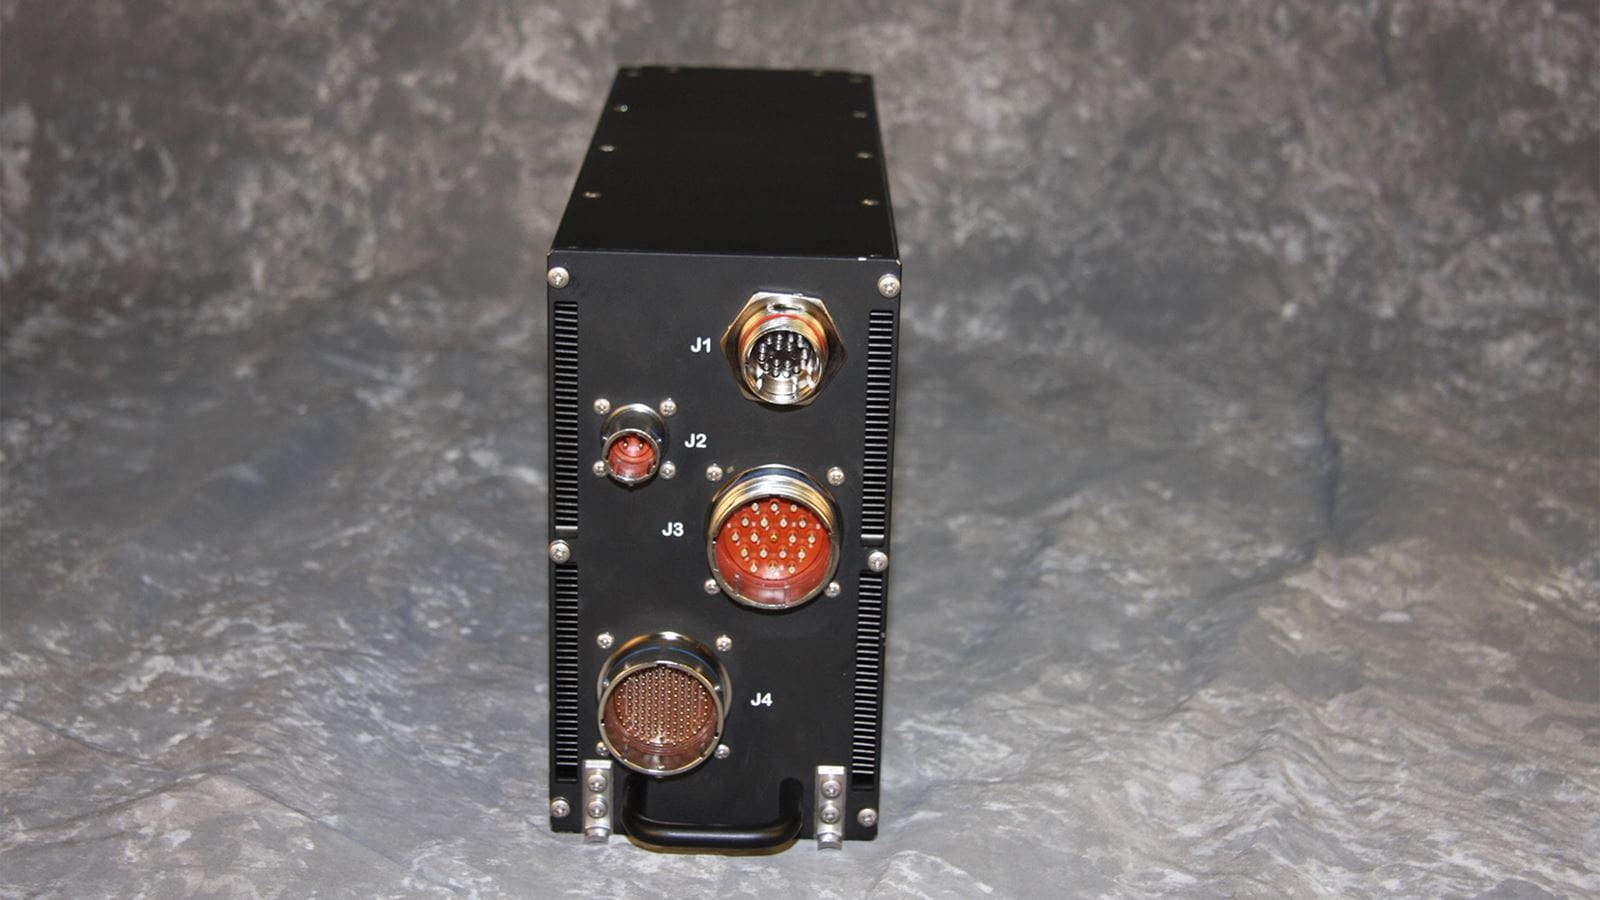 Collins Aerospace is developing a Software Programmable Open Mission Systems (OMS) Compliant (SPOC) radio for the U.S. Air Force as part of a $18.9 million competitive contract awarded in 2019.